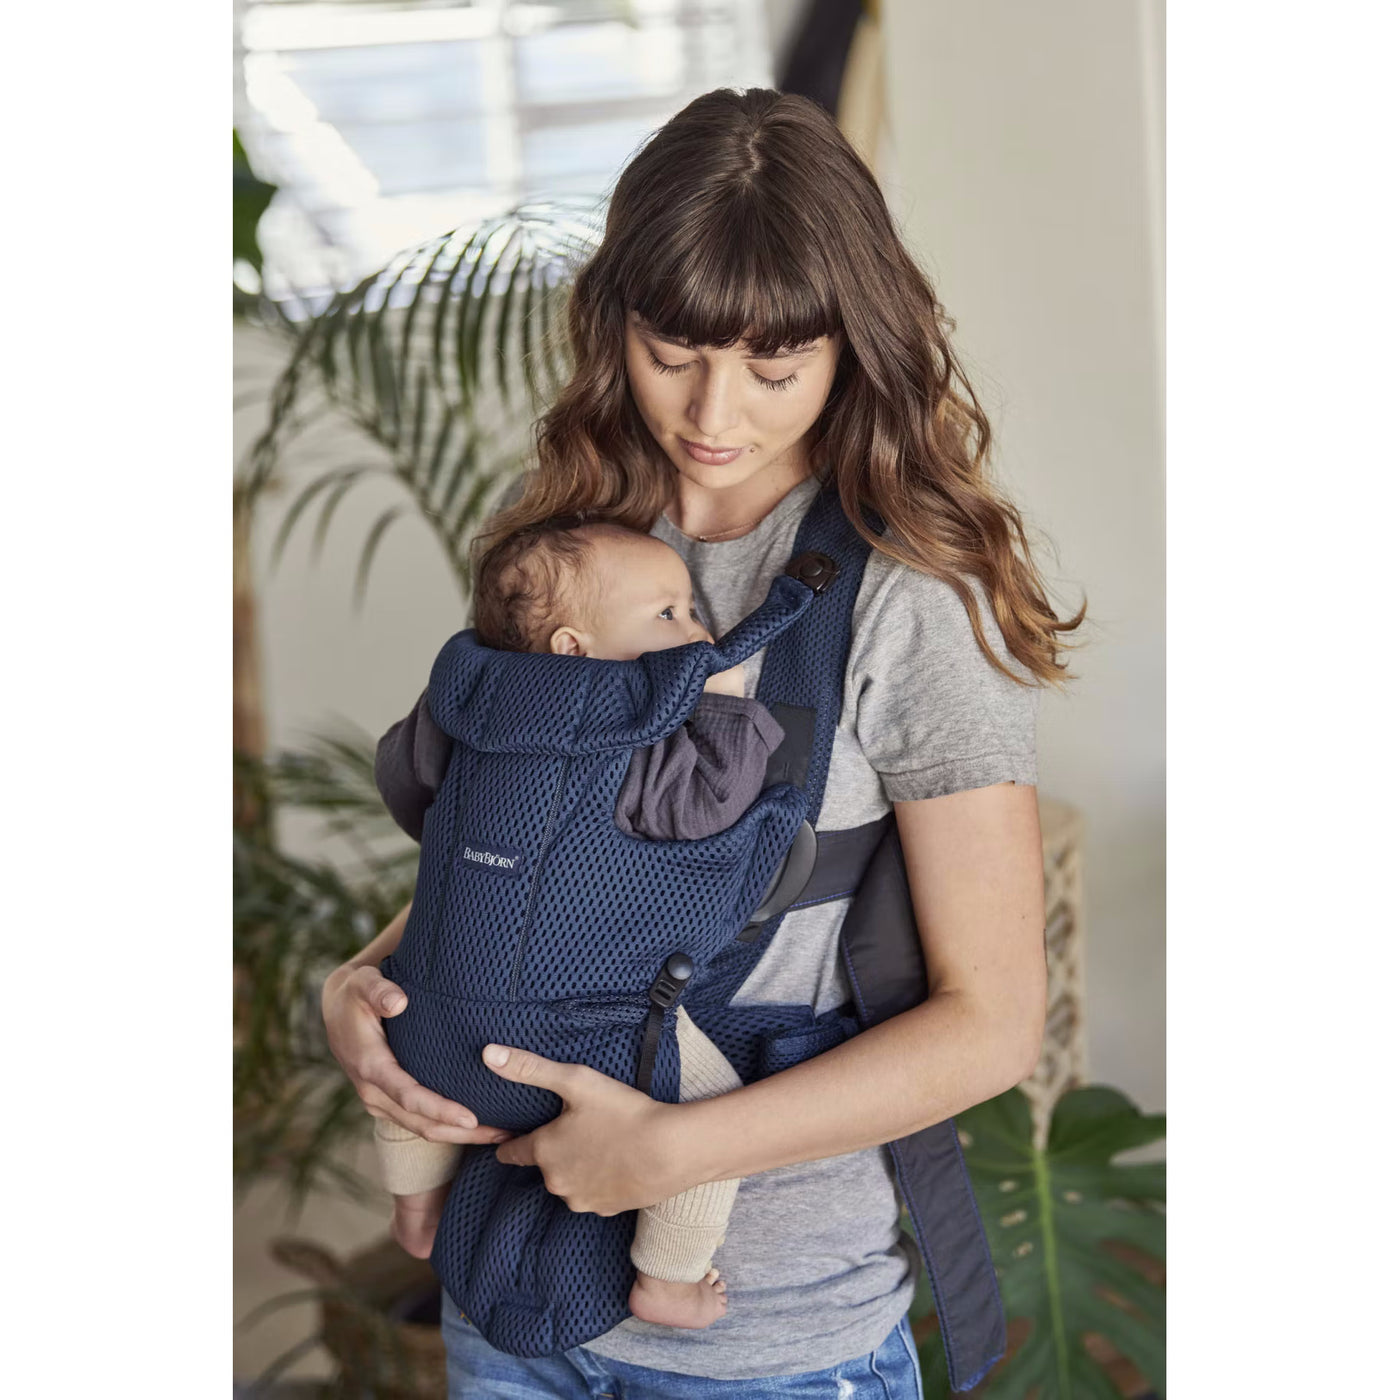 Baby Carrier Move Air 3D Mesh - Navy